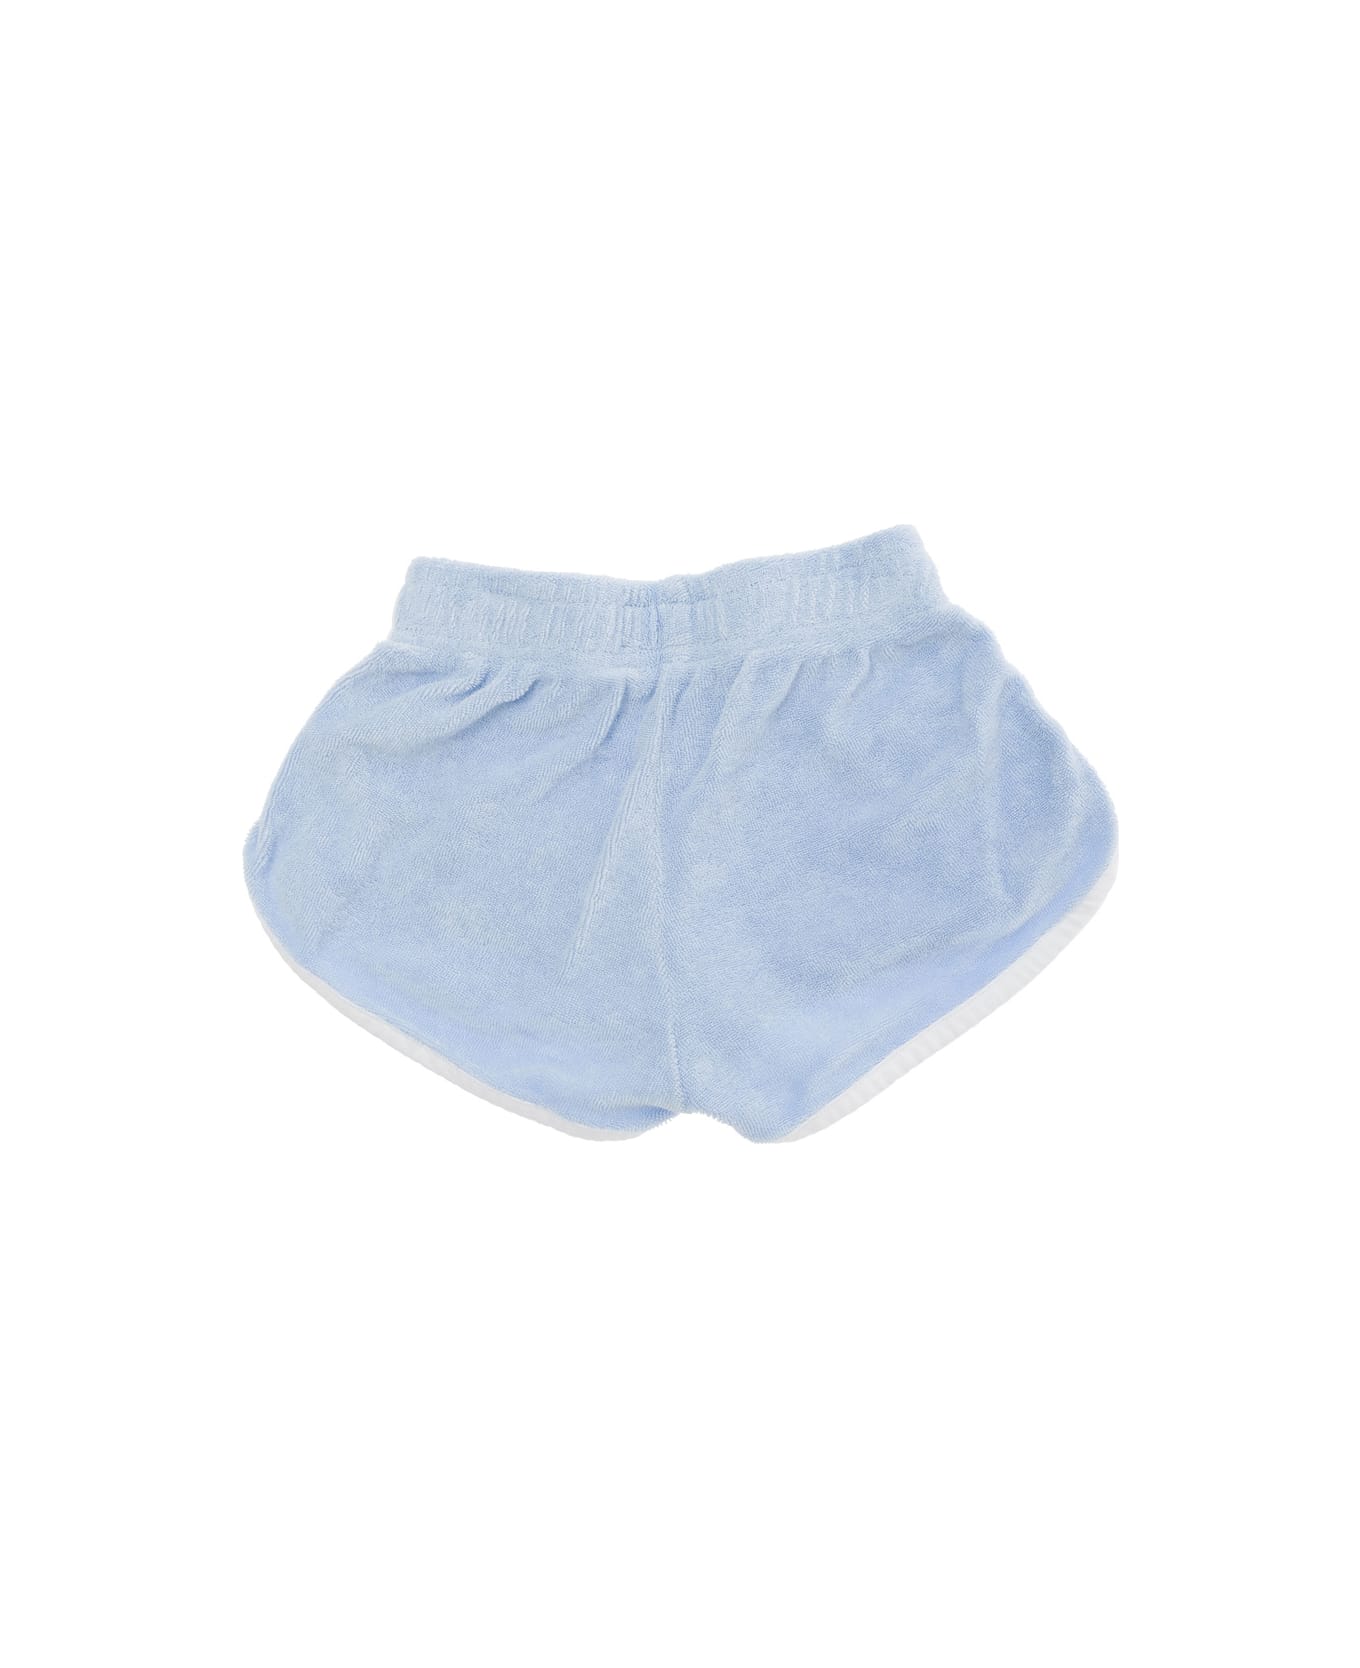 MC2 Saint Barth Light Blue Shorts With Logo Lettering Embroidery In Cotton Blend Baby - Light blue